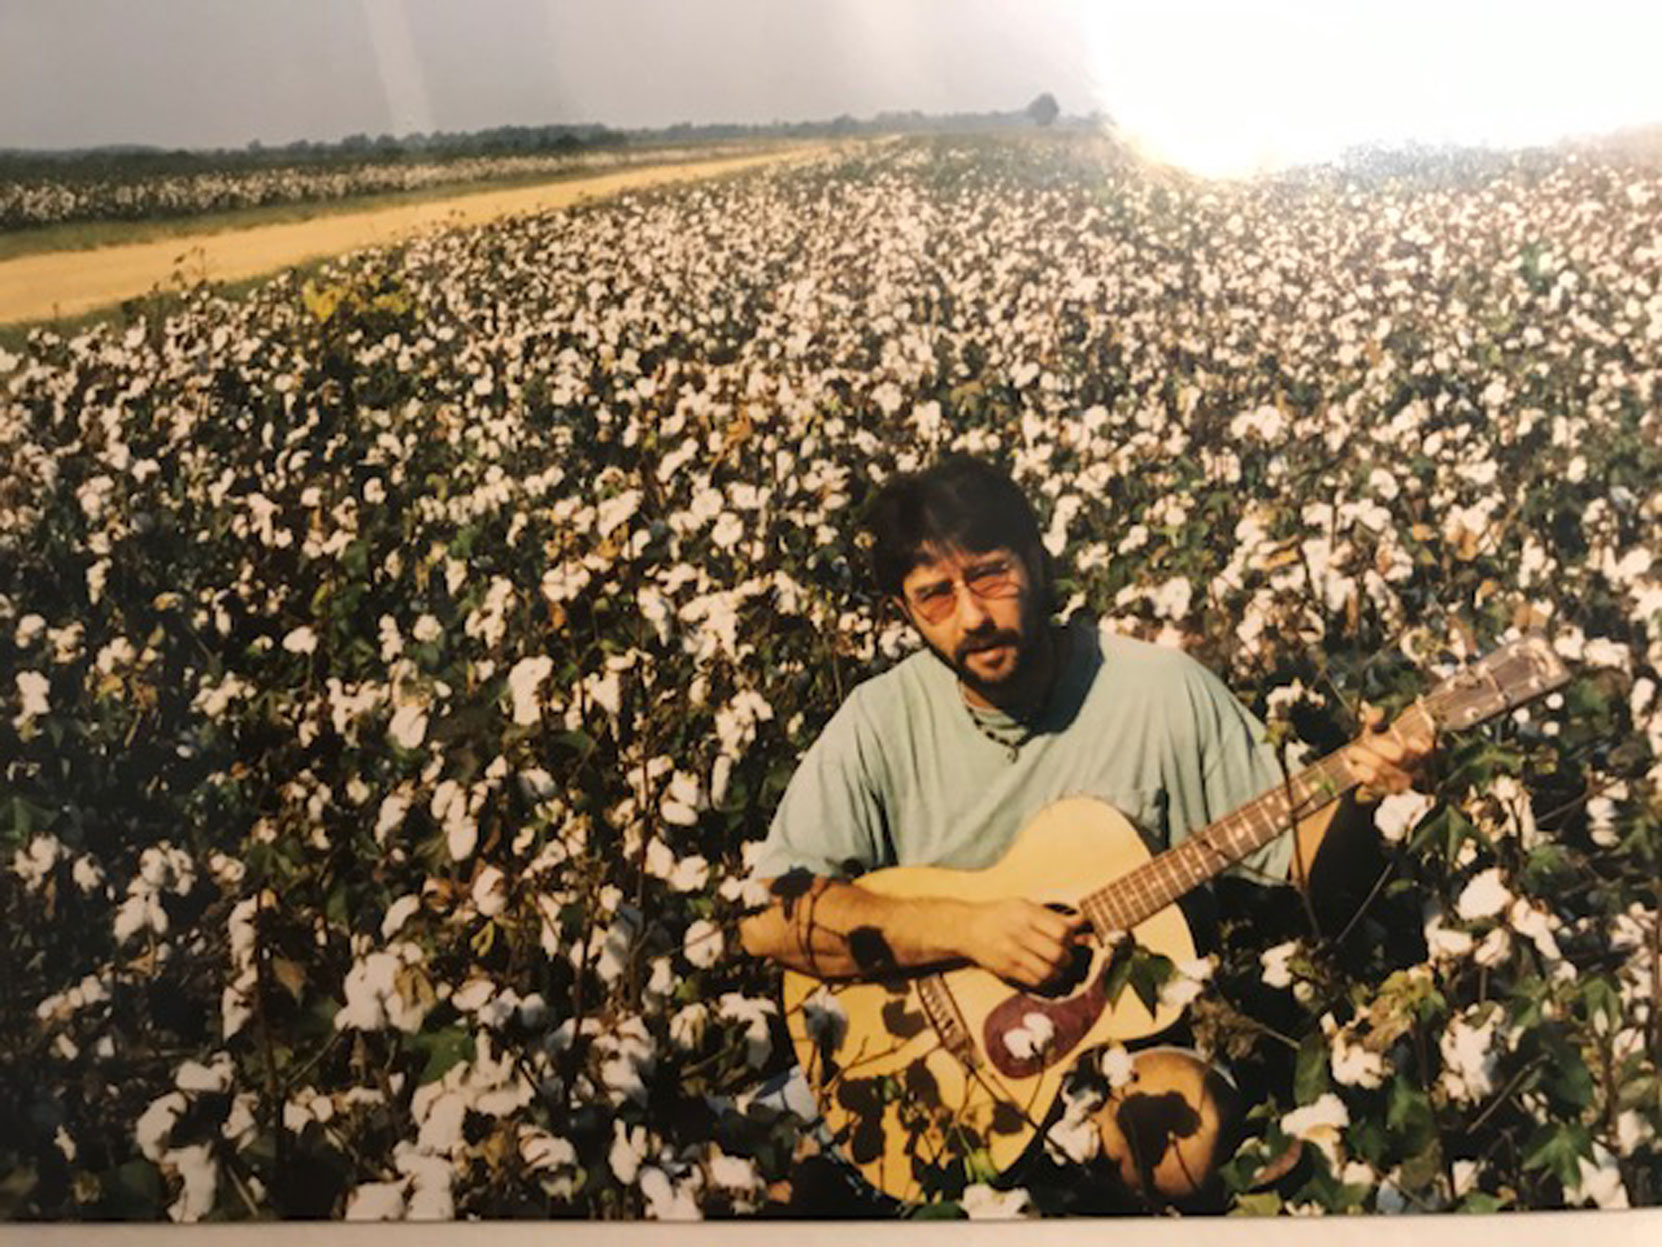 Larry Amato in the Stovall Farms cotton fields near the site Muddy Waters cabin, Clarksdale, Mississippi, circa 1990's (photo: Larry Amato)